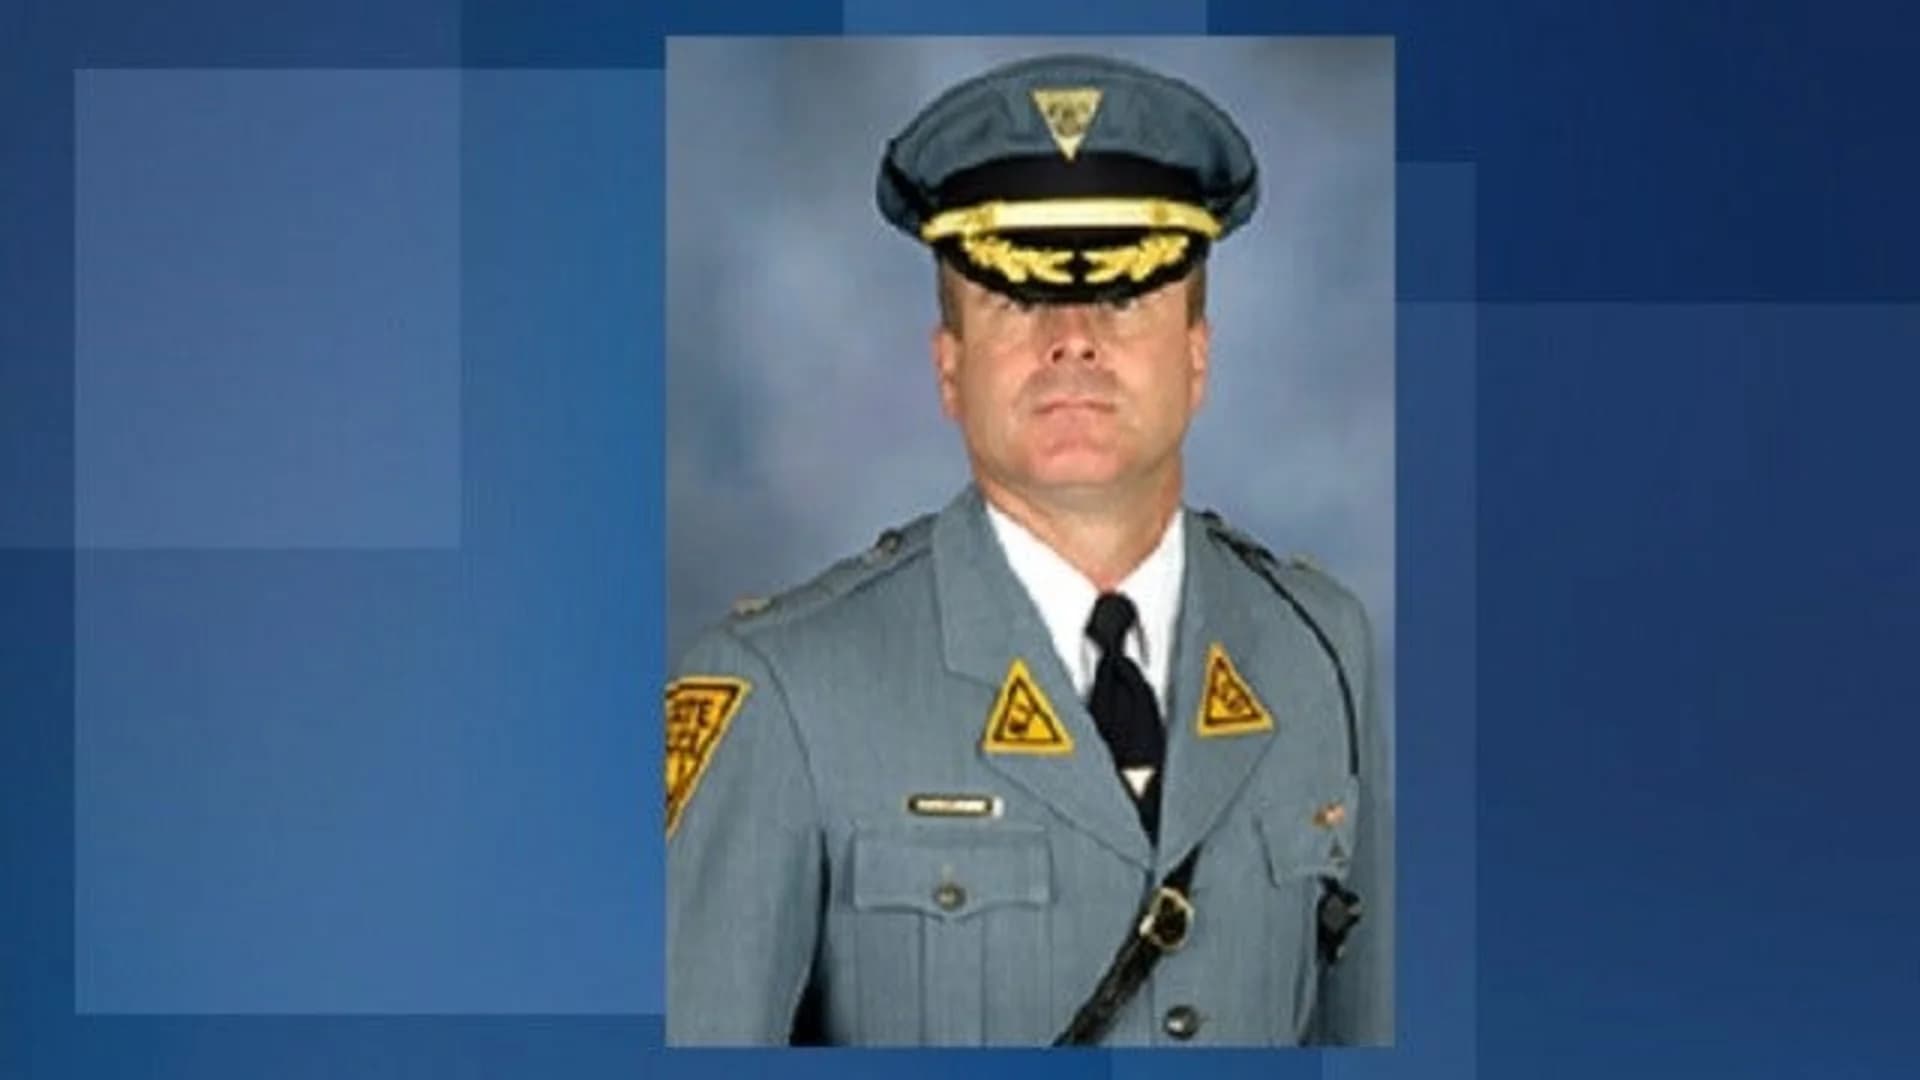 Gov. Christie appoints new leader for state police